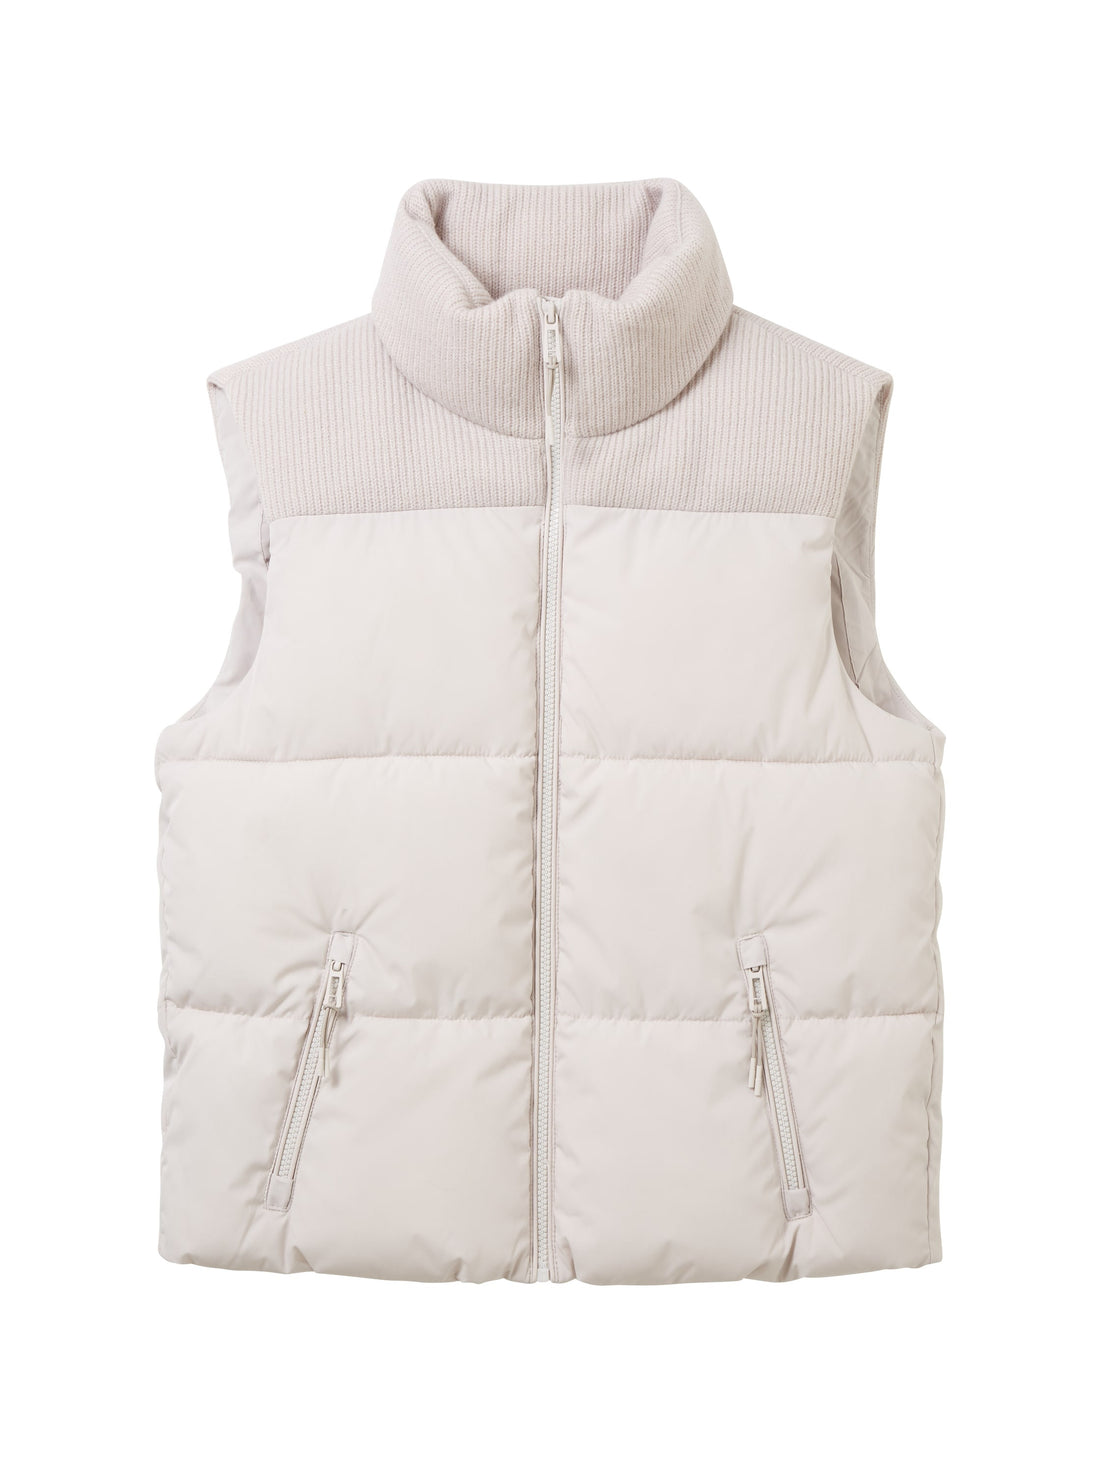 Padded Vest With High Collar_1038676_16339_01